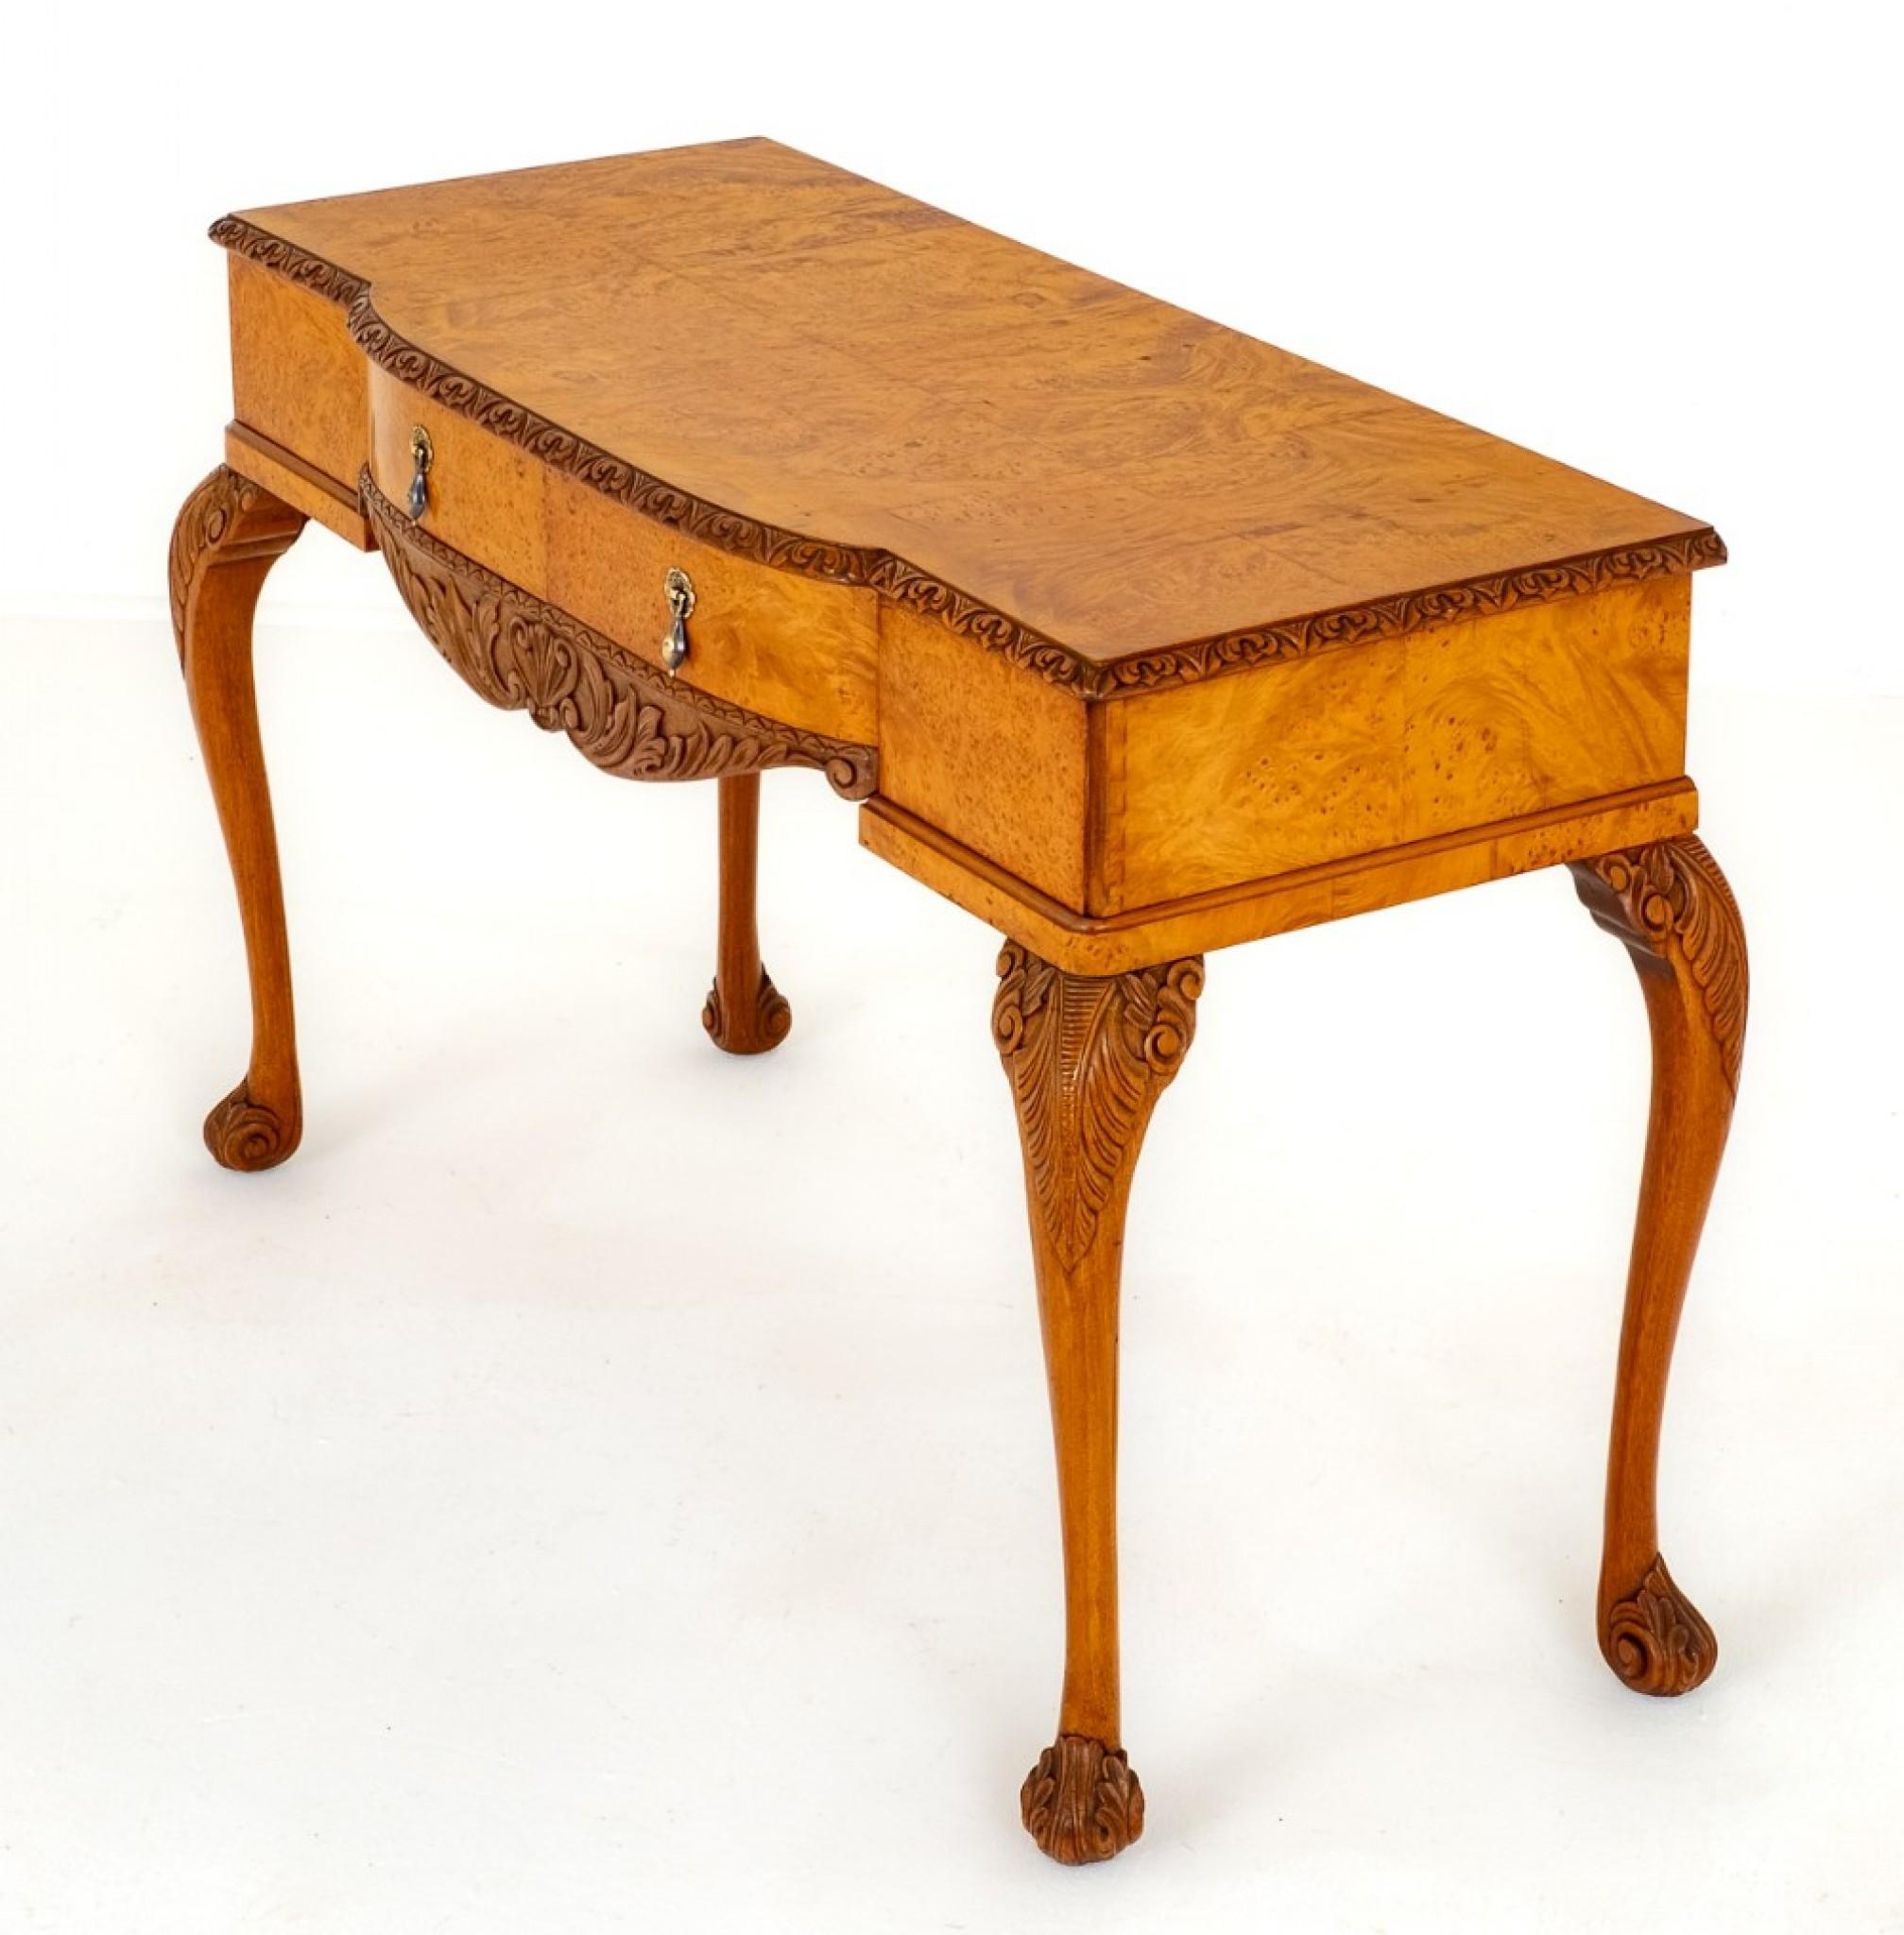 Here we Have a Quality Queen Anne Style Walnut Side Table.
Circa 1930
Raised Upon Cabriole Legs with Carved Knees and Carved Feet.
The Table Features 2 Mahogany and Baize Lined Drawers with a Shaped and Carved Frieze.
The Top of the Table Having